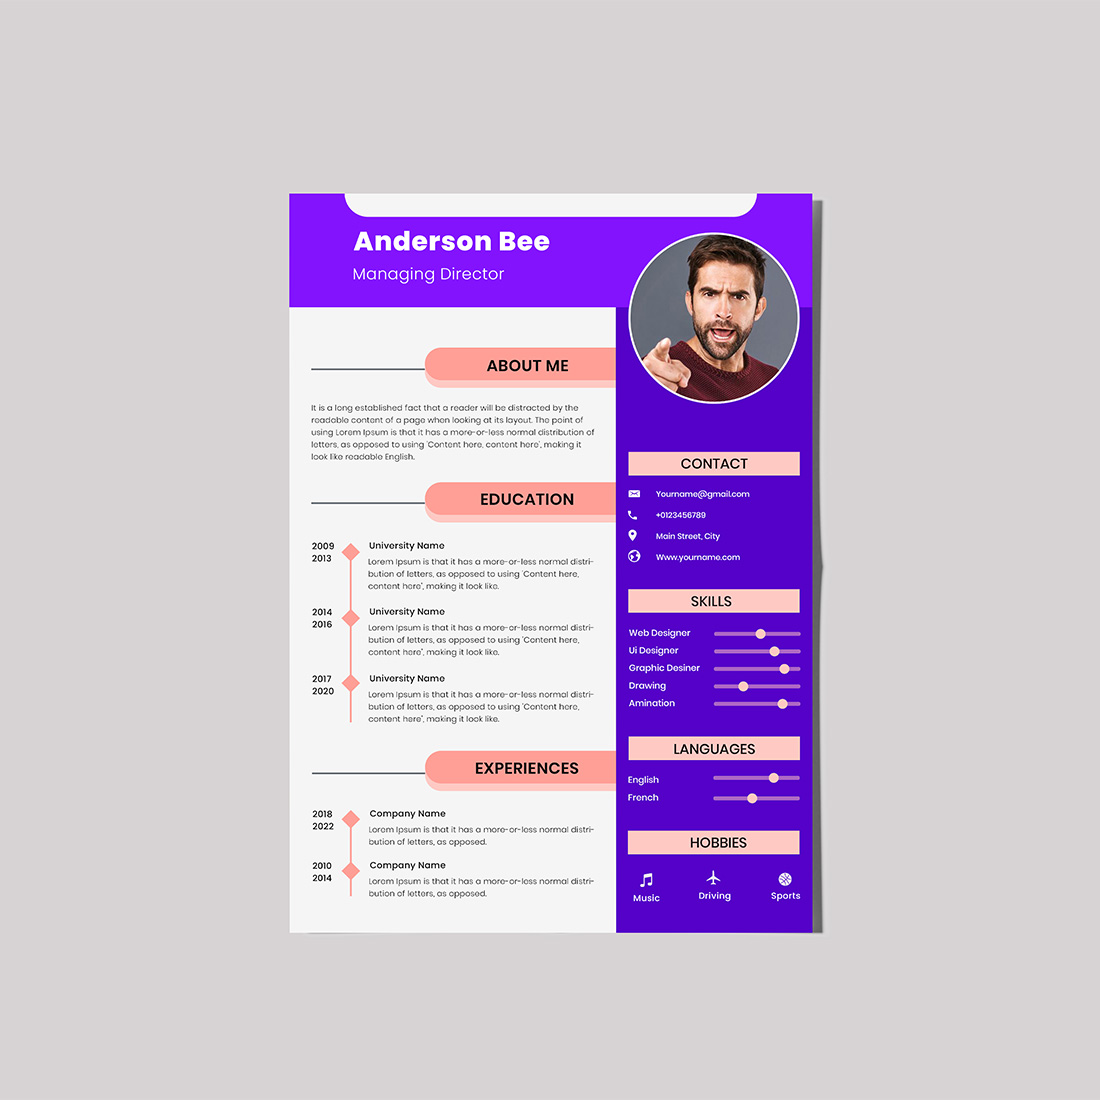 Anderson is awesome Resume and CV Template for you who looking for job applications cover image.